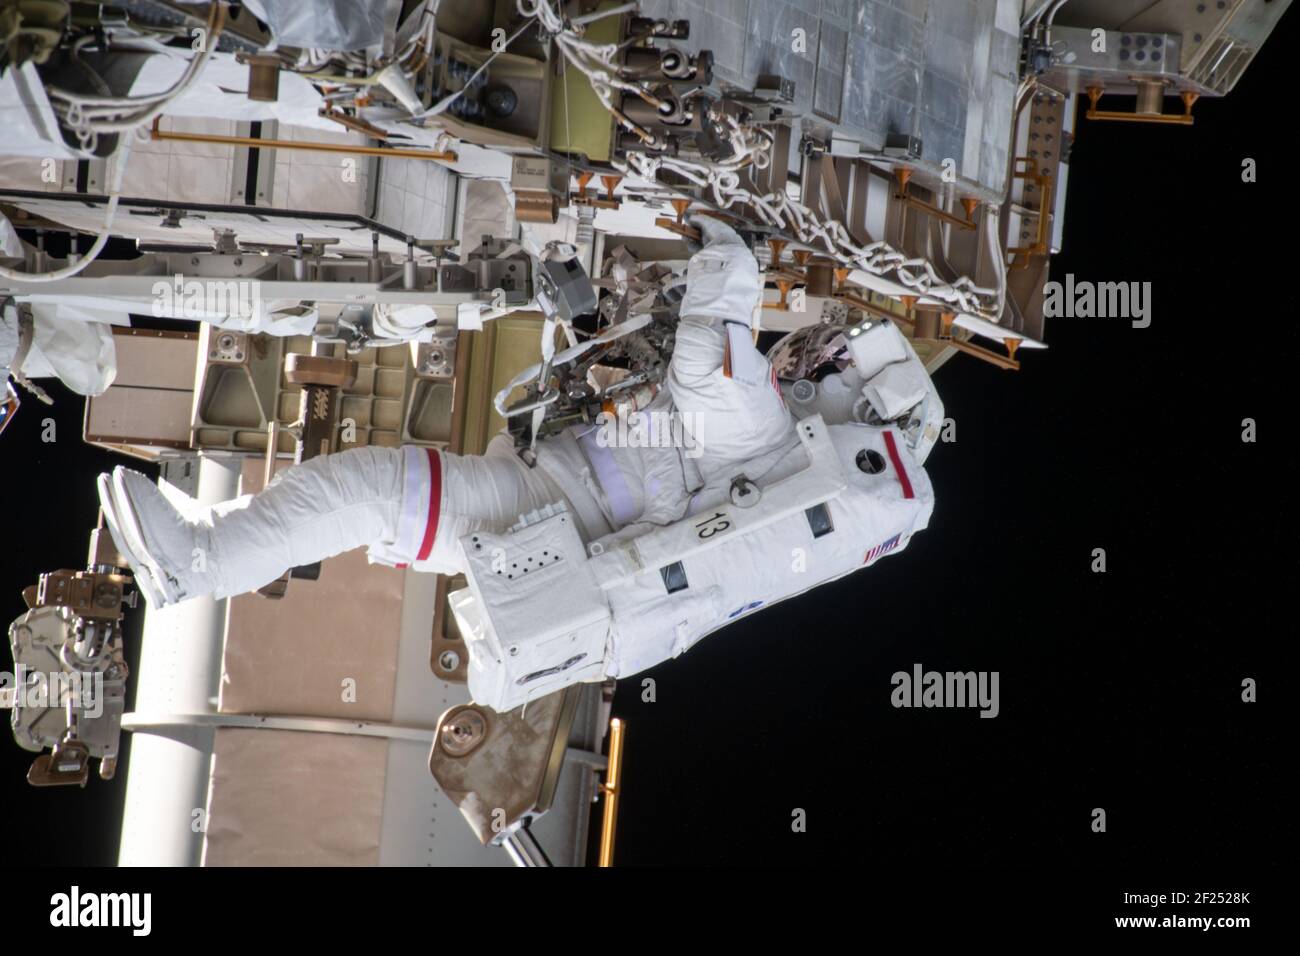 NASA astronaut Kate Rubins during a second spacewalk to install solar array modification kits on the International Space Station March 5, 2021 in Earth Orbit. The maintenance work will support new, more powerful solar arrays that will be delivered on upcoming SpaceX Dragon cargo missions. Stock Photo